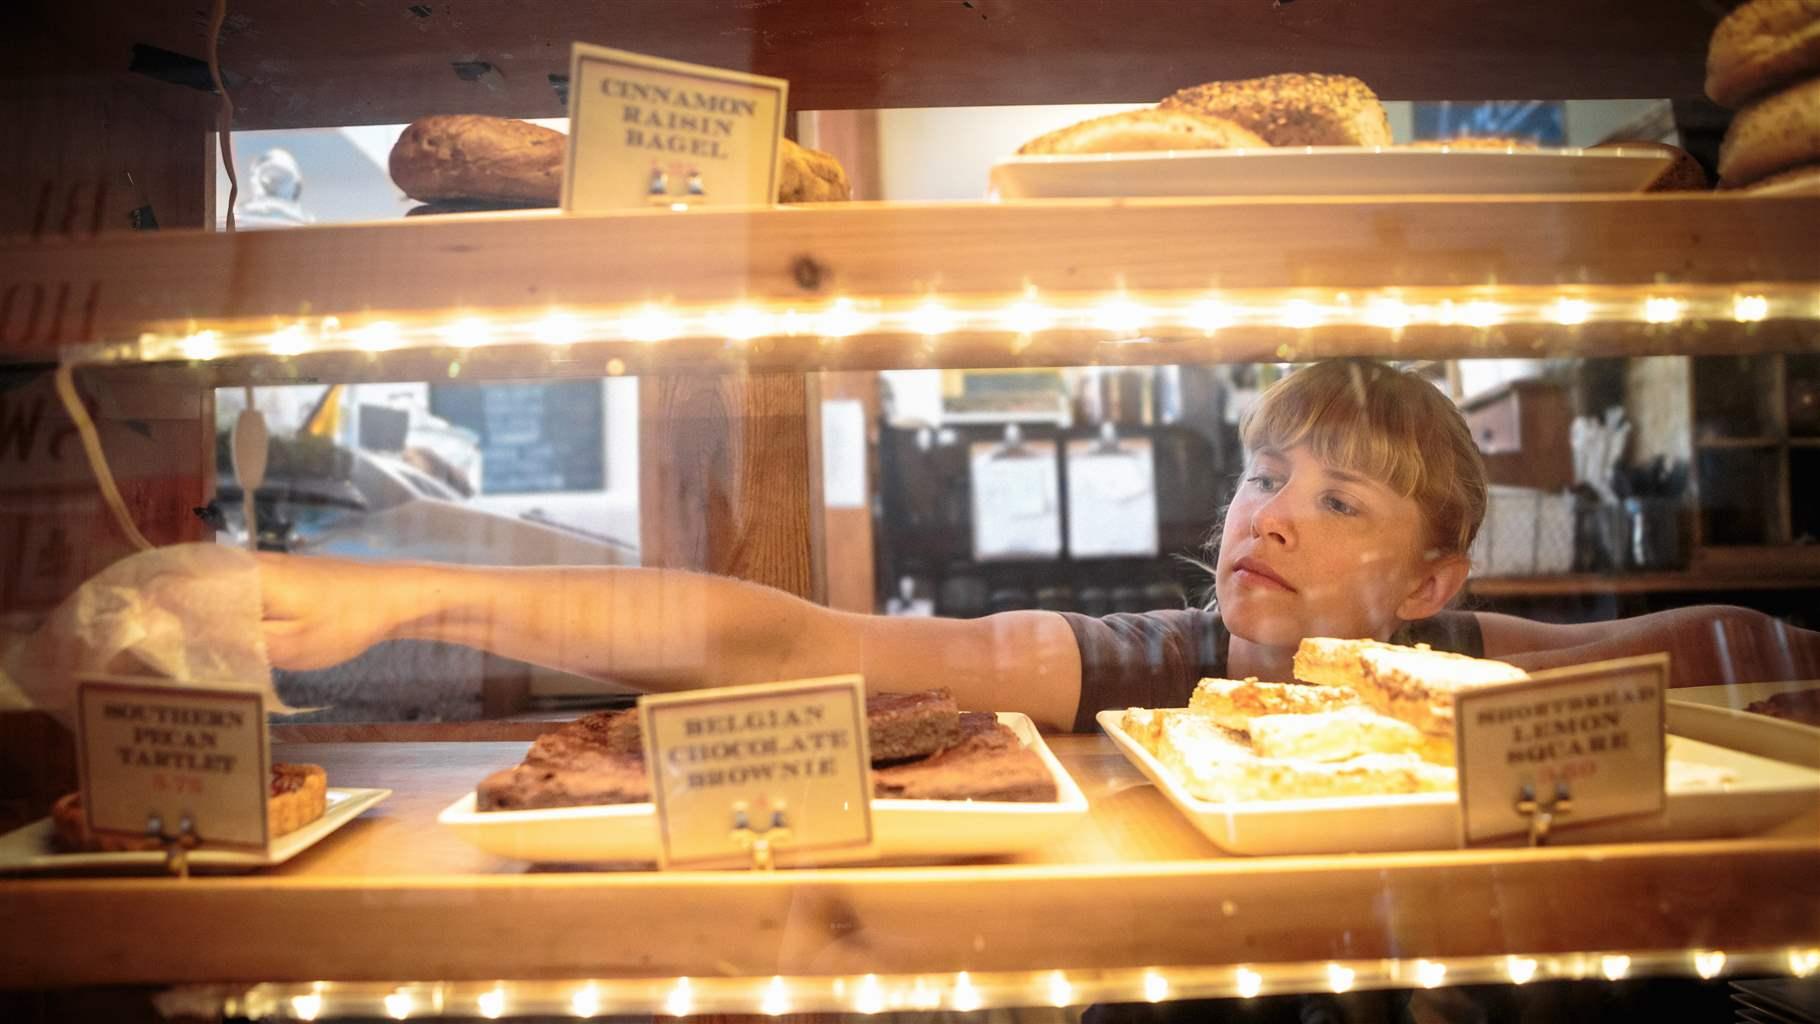 A bakery shop employee with brown hair and wearing a gray shirt reaches into a lighted pastry case where the store’s array of baked goods are displayed.